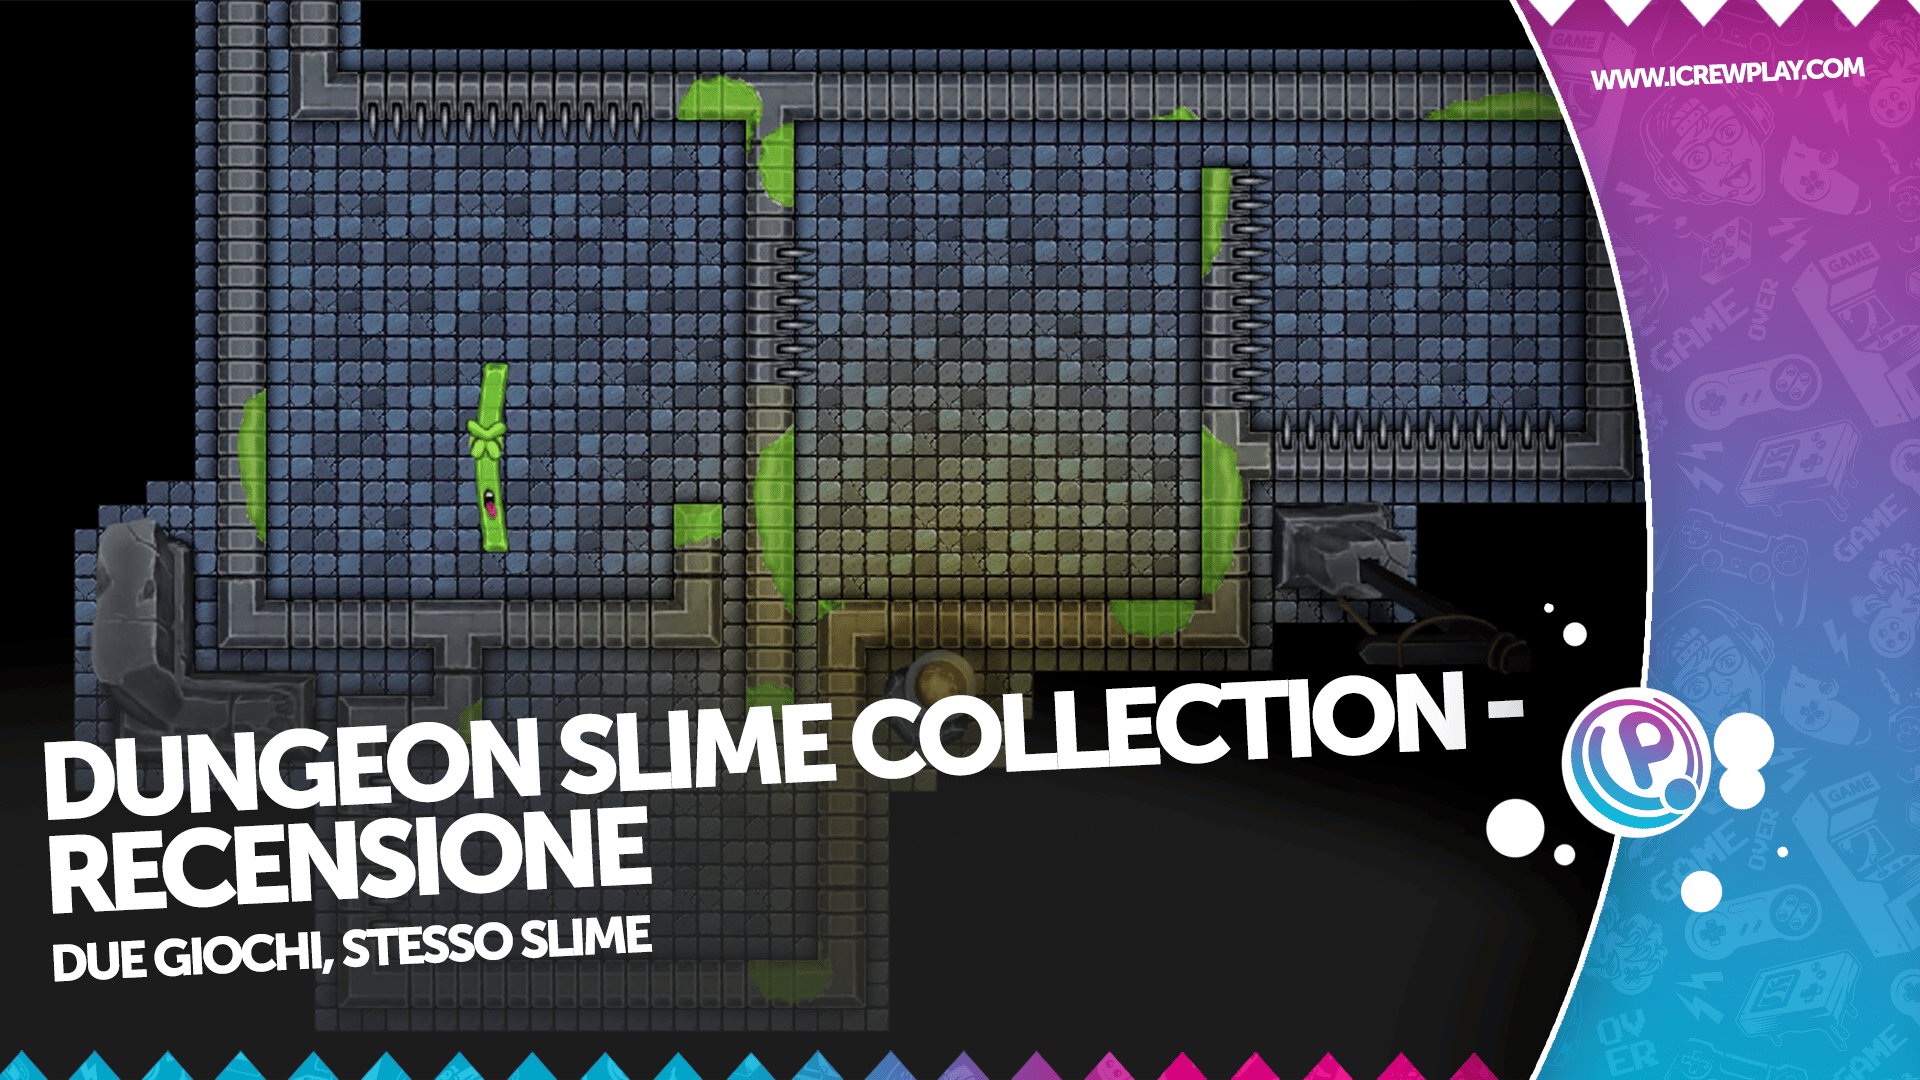 Dungeon Slime Collection - Recensione per Nintendo Switch 12